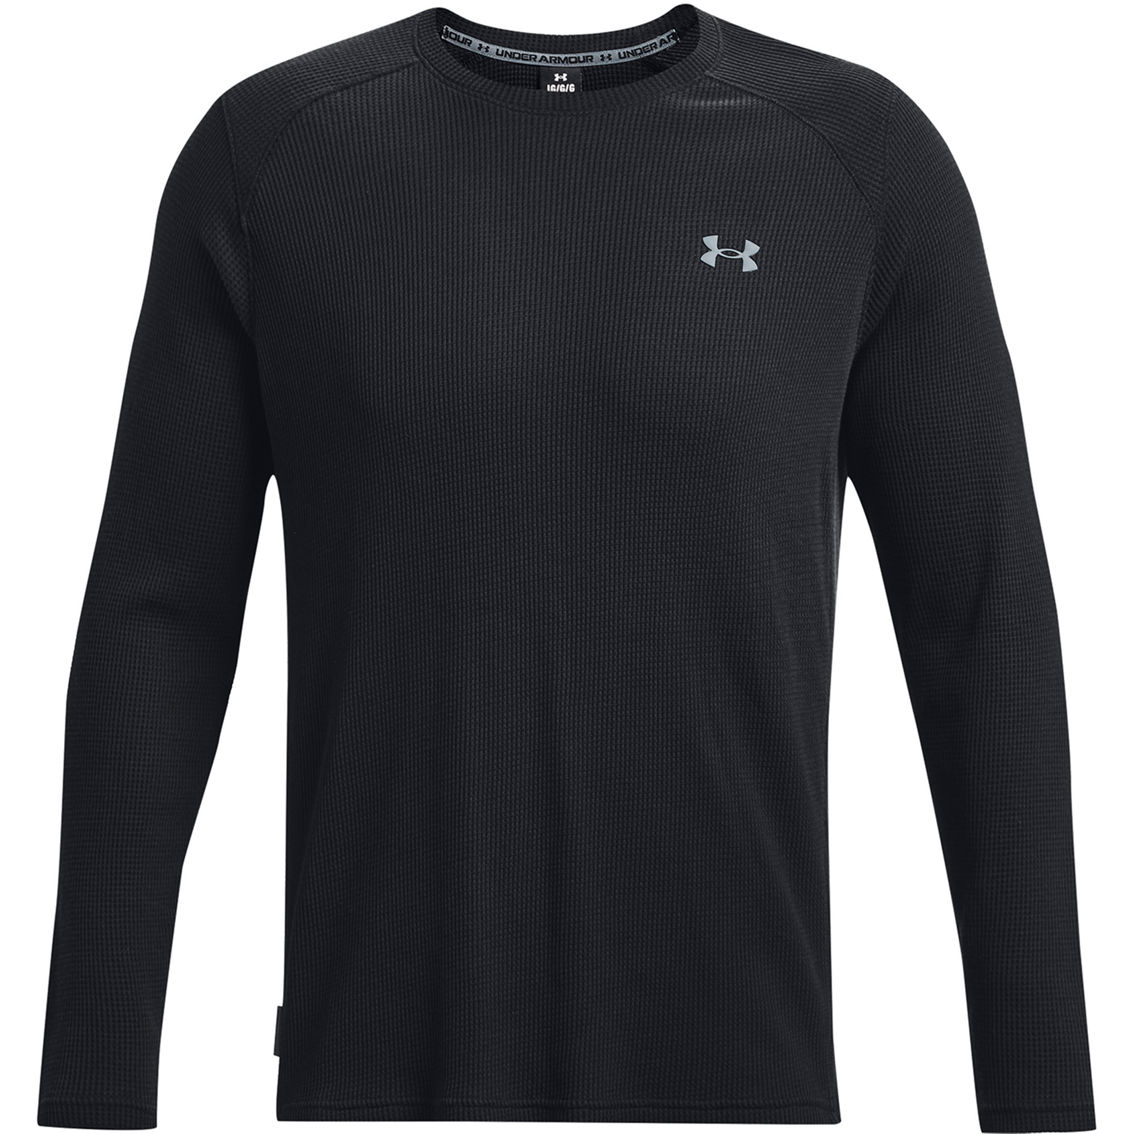 Under Armour Waffle Knit Max Crew Sweater - Image 5 of 6